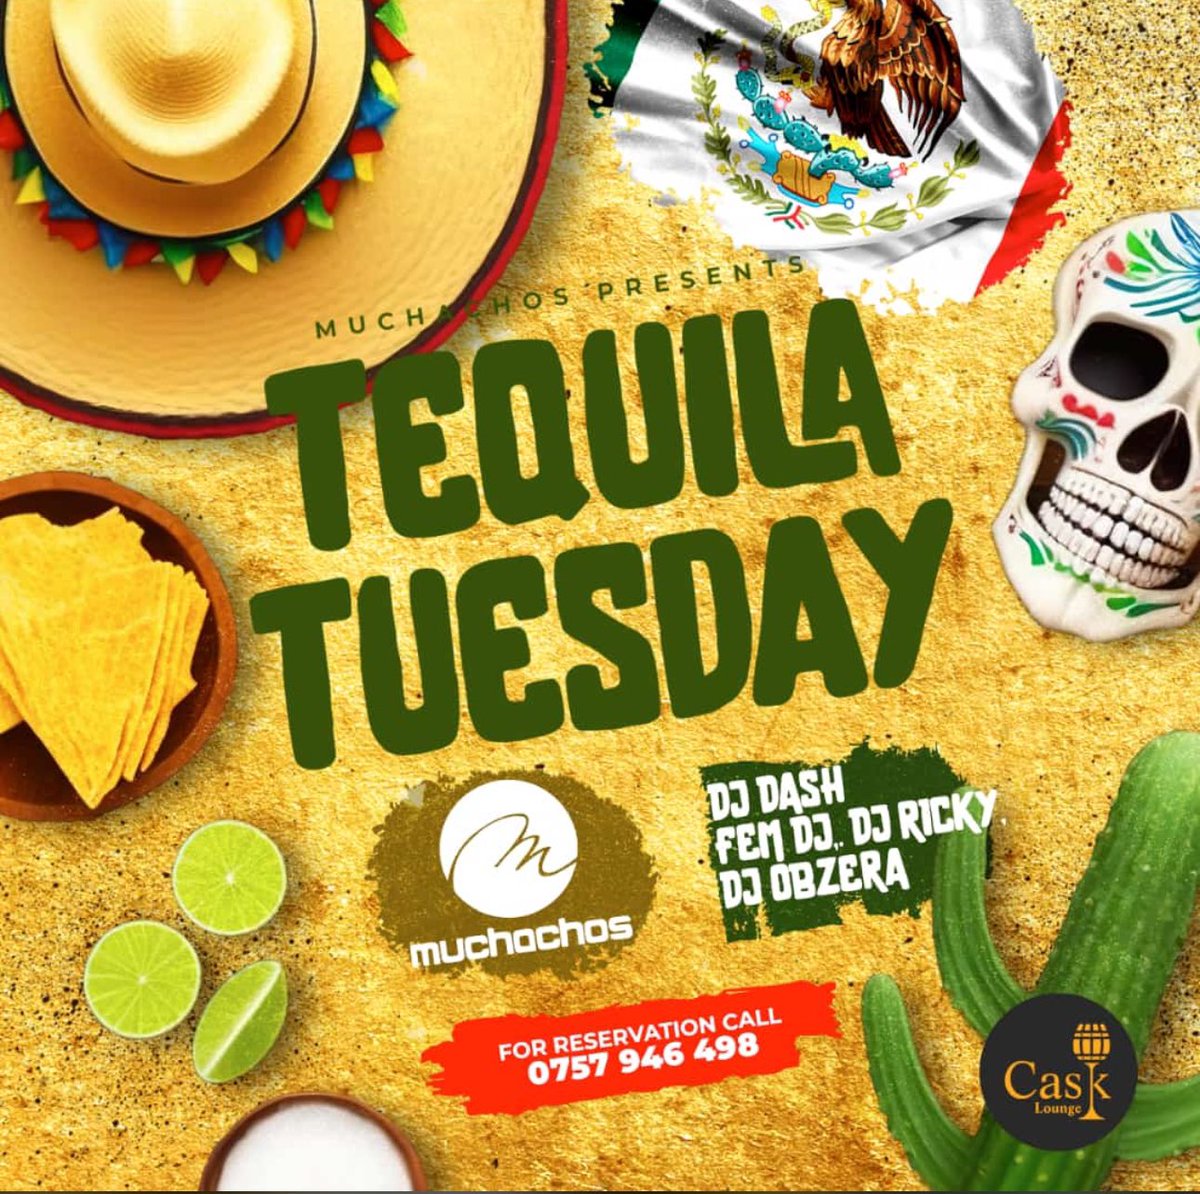 Sip, savor, celebrate as we embrace Mexico’s spirit at Cask’s #TequilaTuesday Night featuring Kampala’s hottest Deejays!